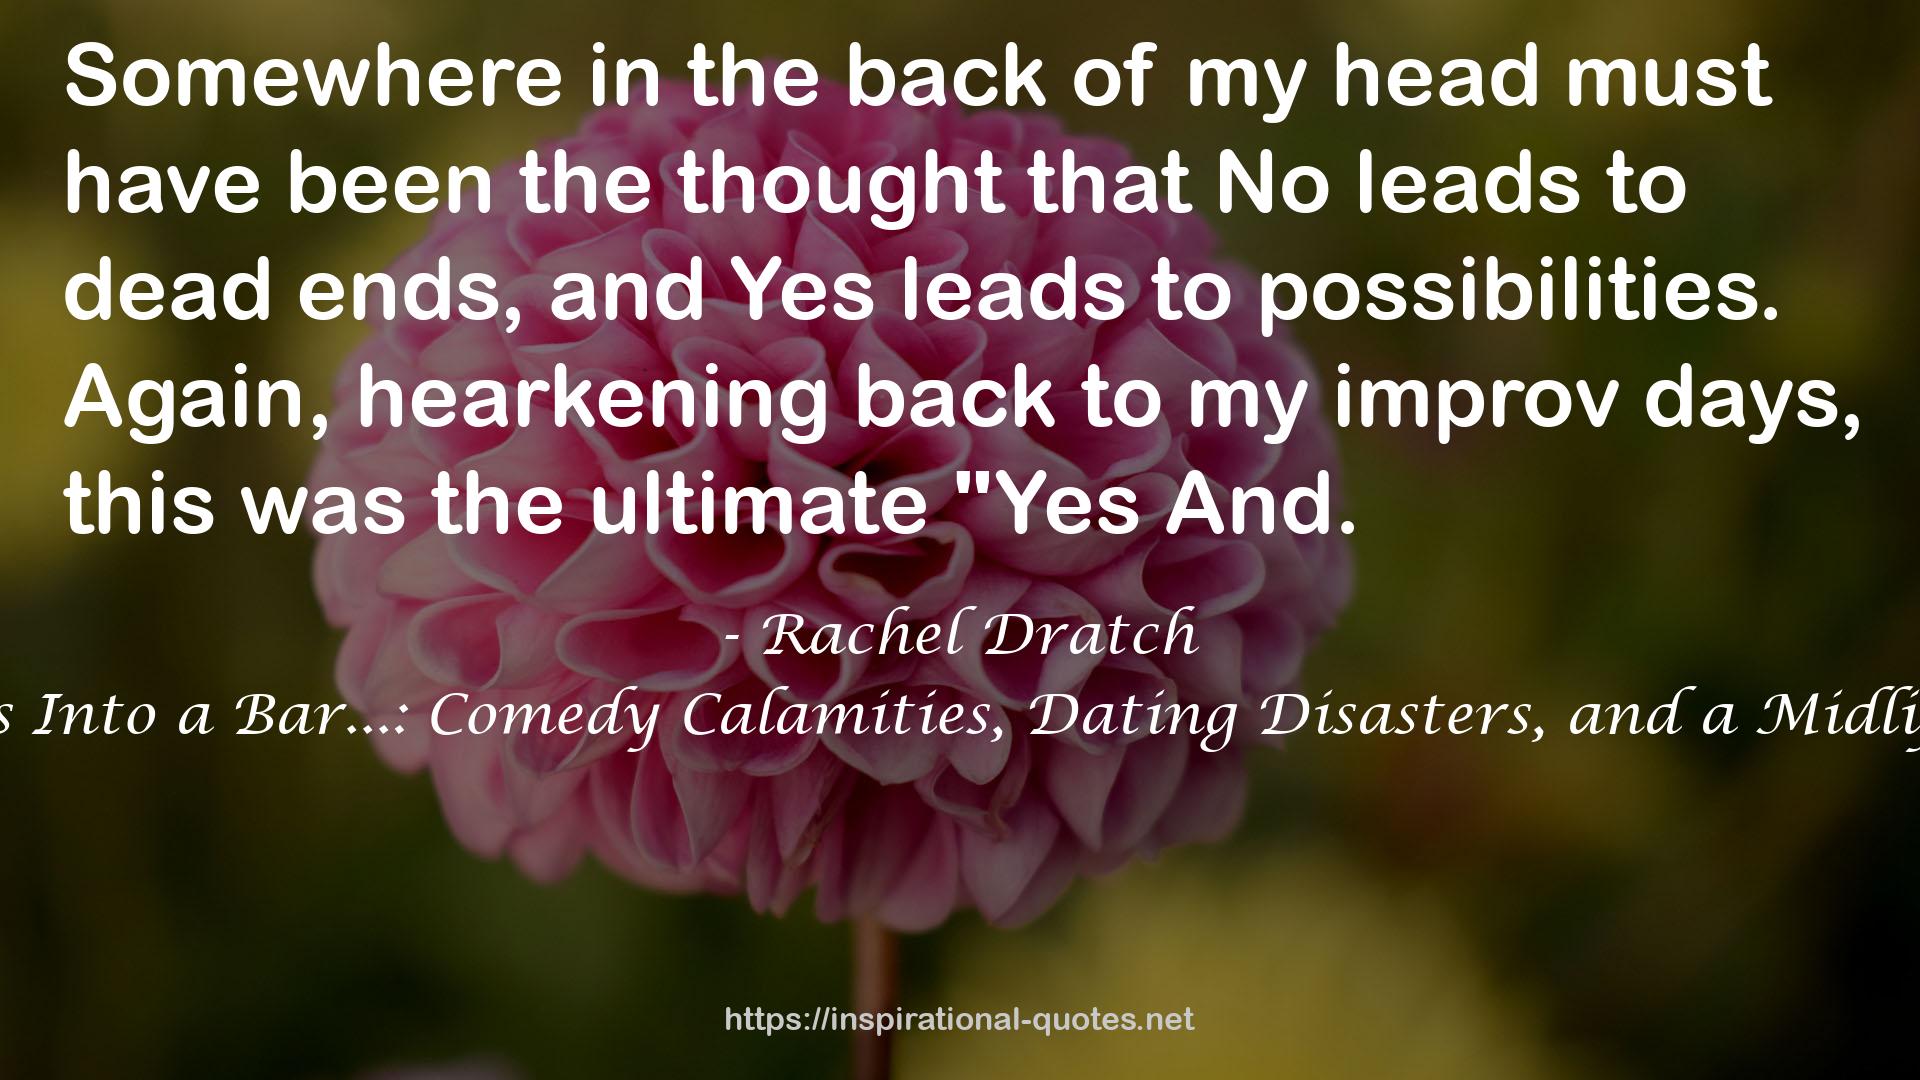 Girl Walks Into a Bar...: Comedy Calamities, Dating Disasters, and a Midlife Miracle QUOTES